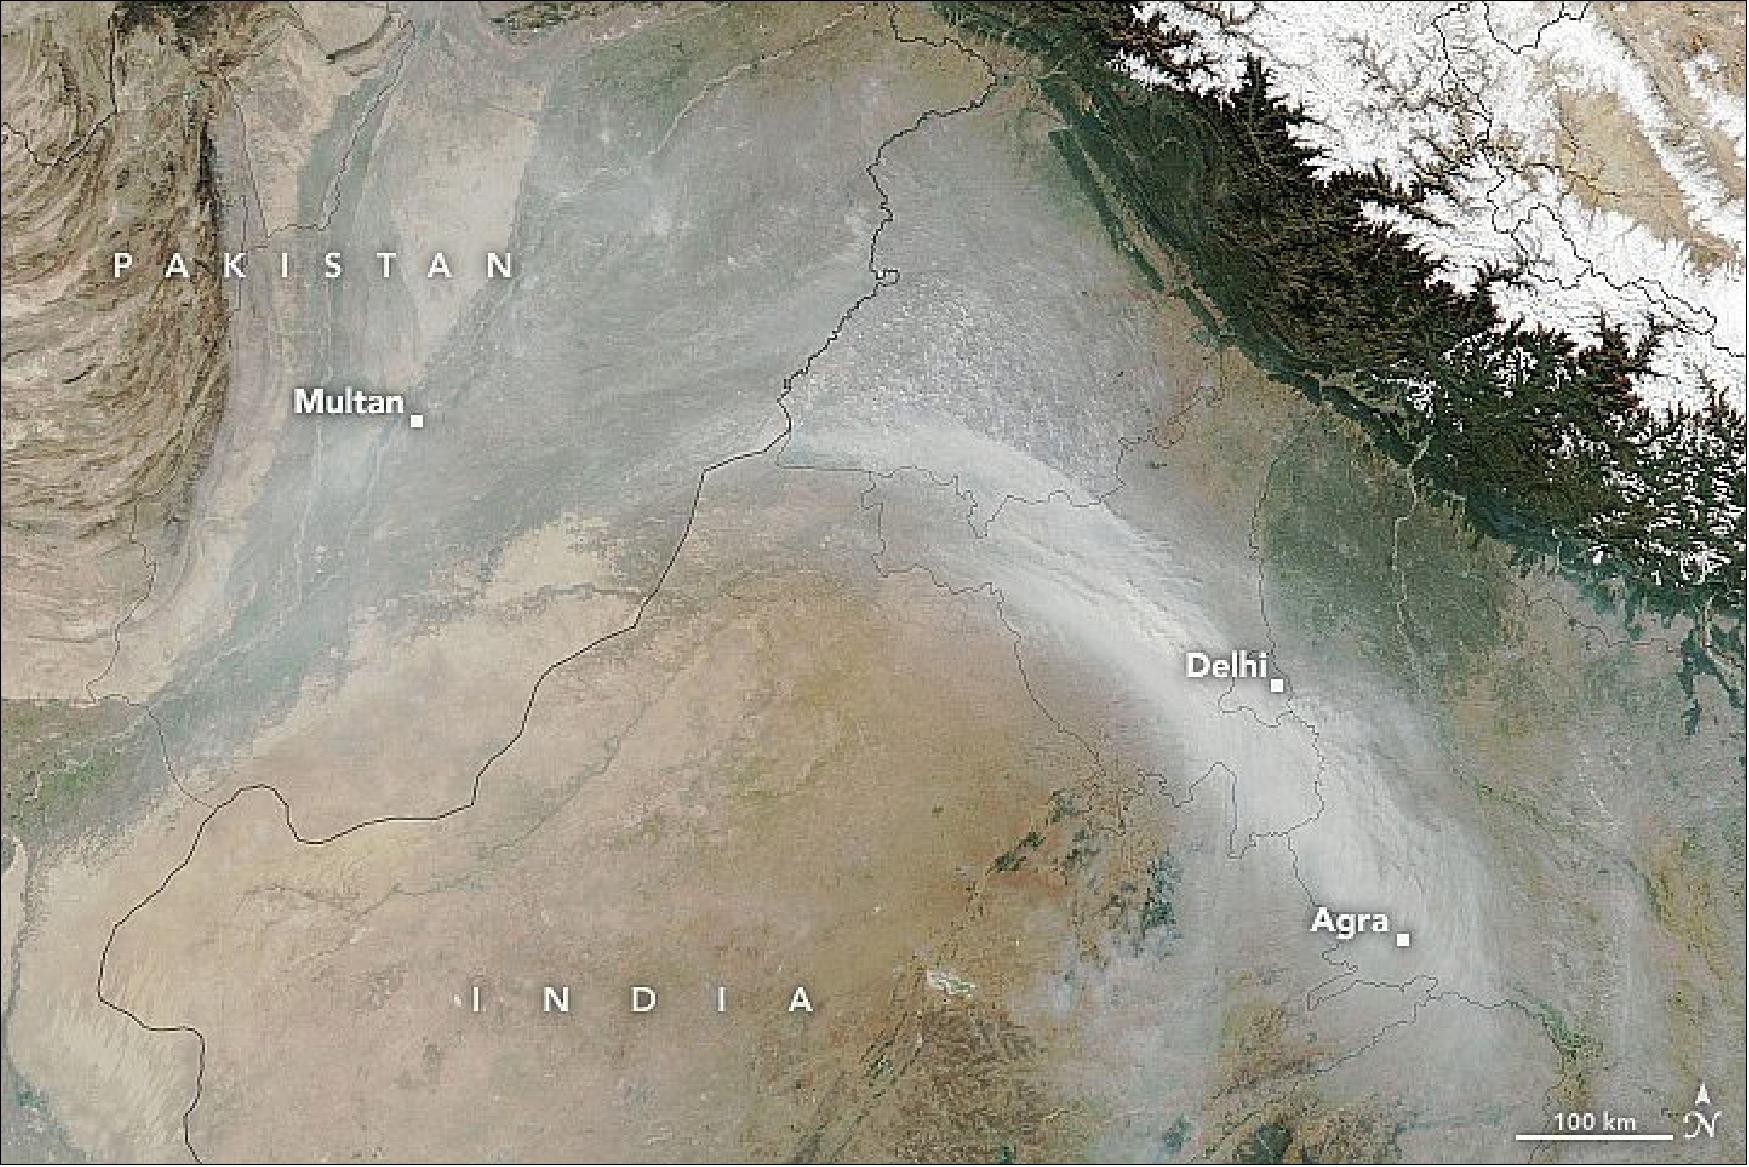 Figure 3: Smoke from crop fires in northern India blanketed the populous city and contributed to soaring levels of air pollution (image credit: NASA Earth Observatory images by Lauren Dauphin, using MODIS data from NASA EOSDIS LANCE and GIBS/Worldview. Story by Adam Voiland)